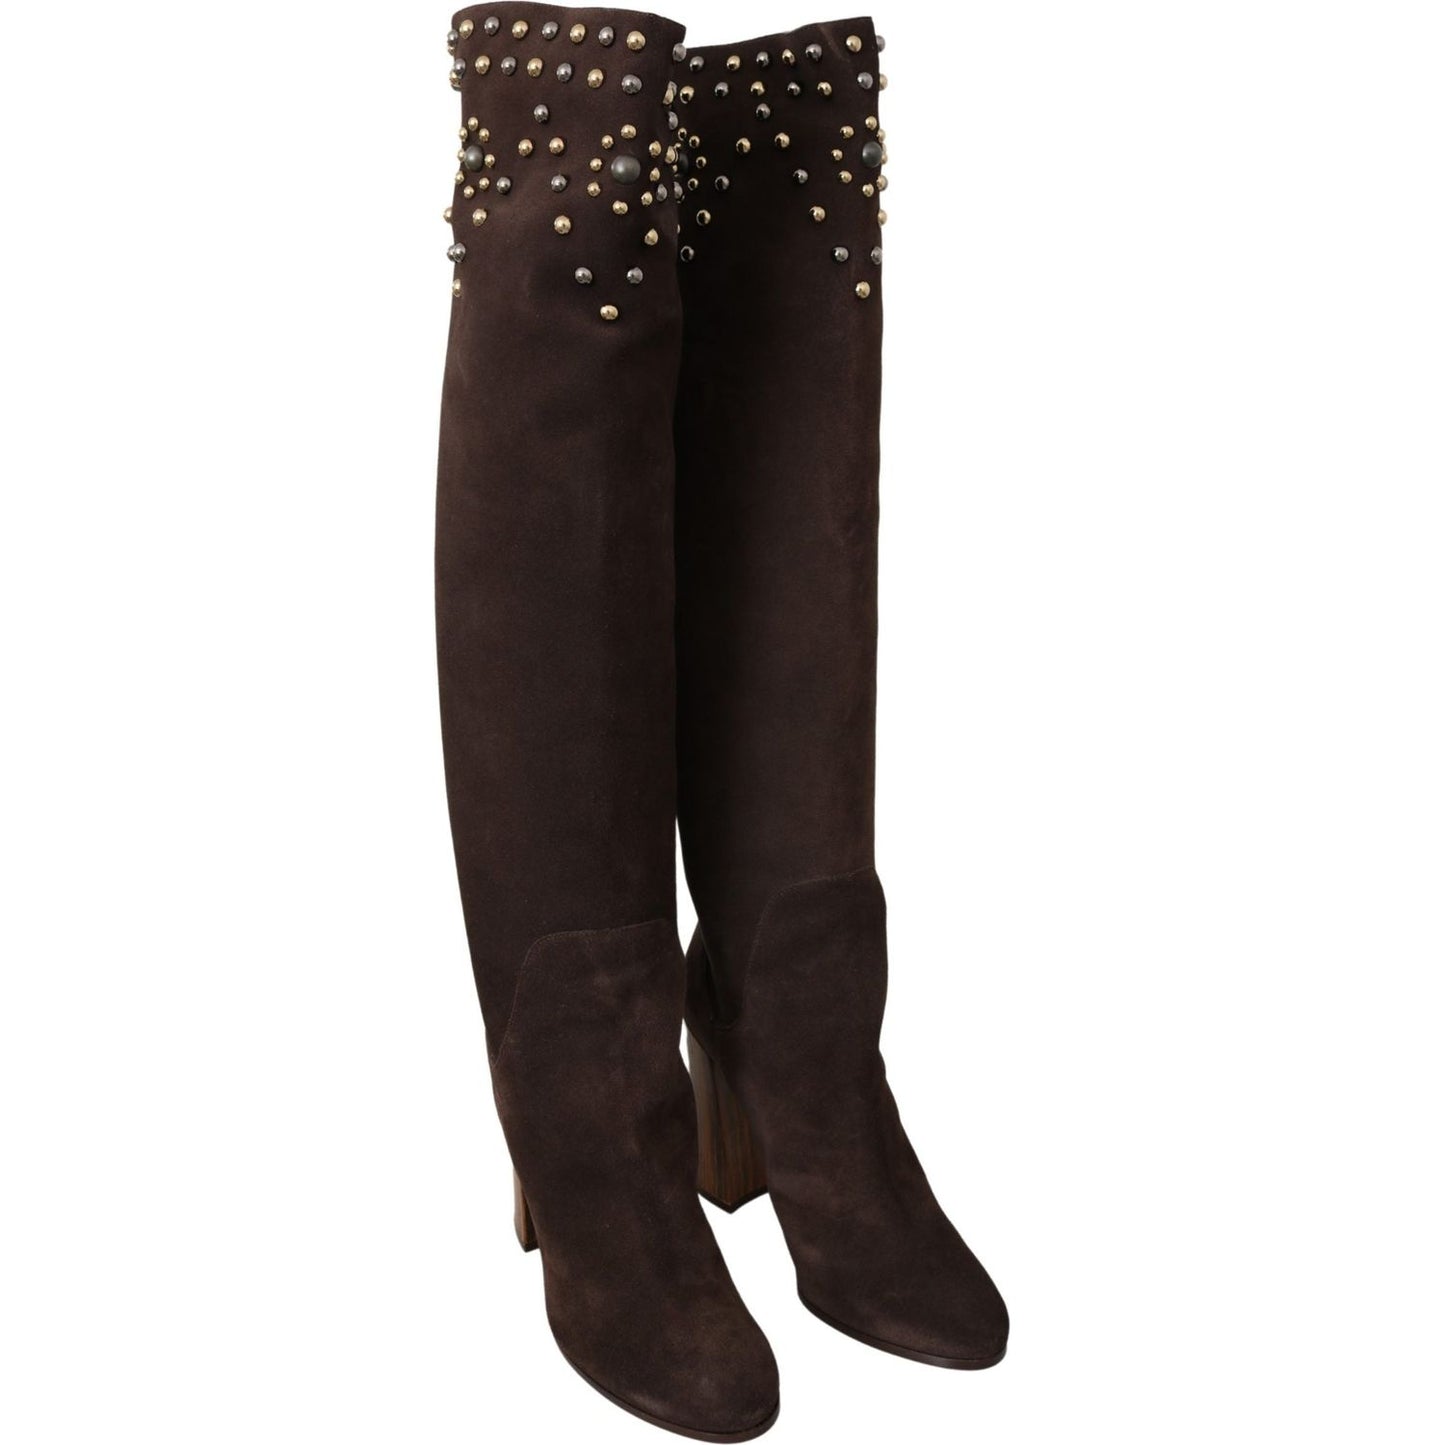 Dolce & Gabbana Studded Suede Knee High Boots in Brown brown-suede-studded-knee-high-shoes-boots